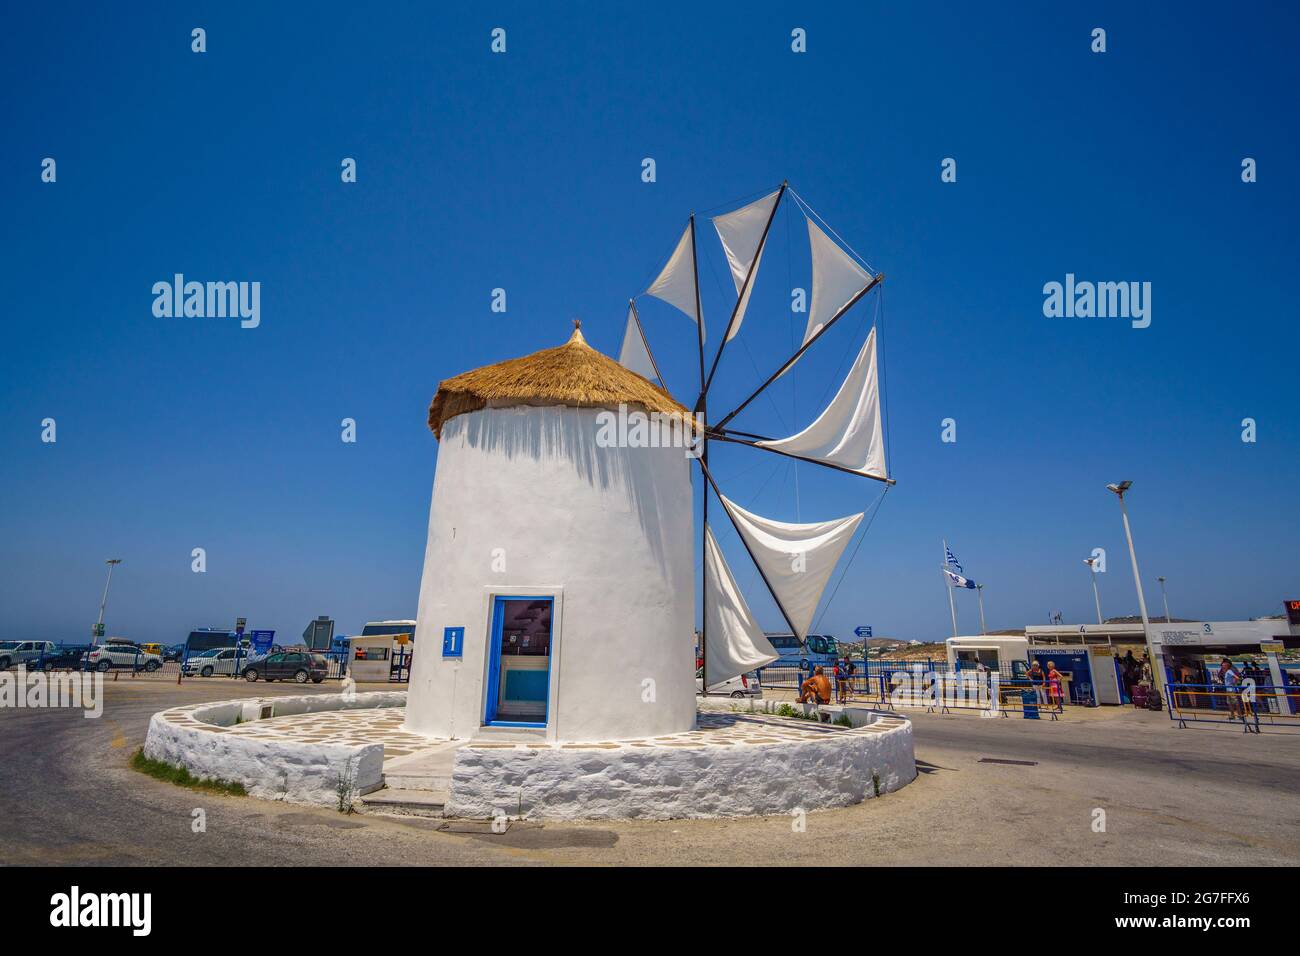 PAROS, CYCLADES, GREECE - JUNE 2017: Traditional cycladic windmill against a deep blue sky in a beautiful summer day on Paros island, Cyclades, Greece Stock Photo